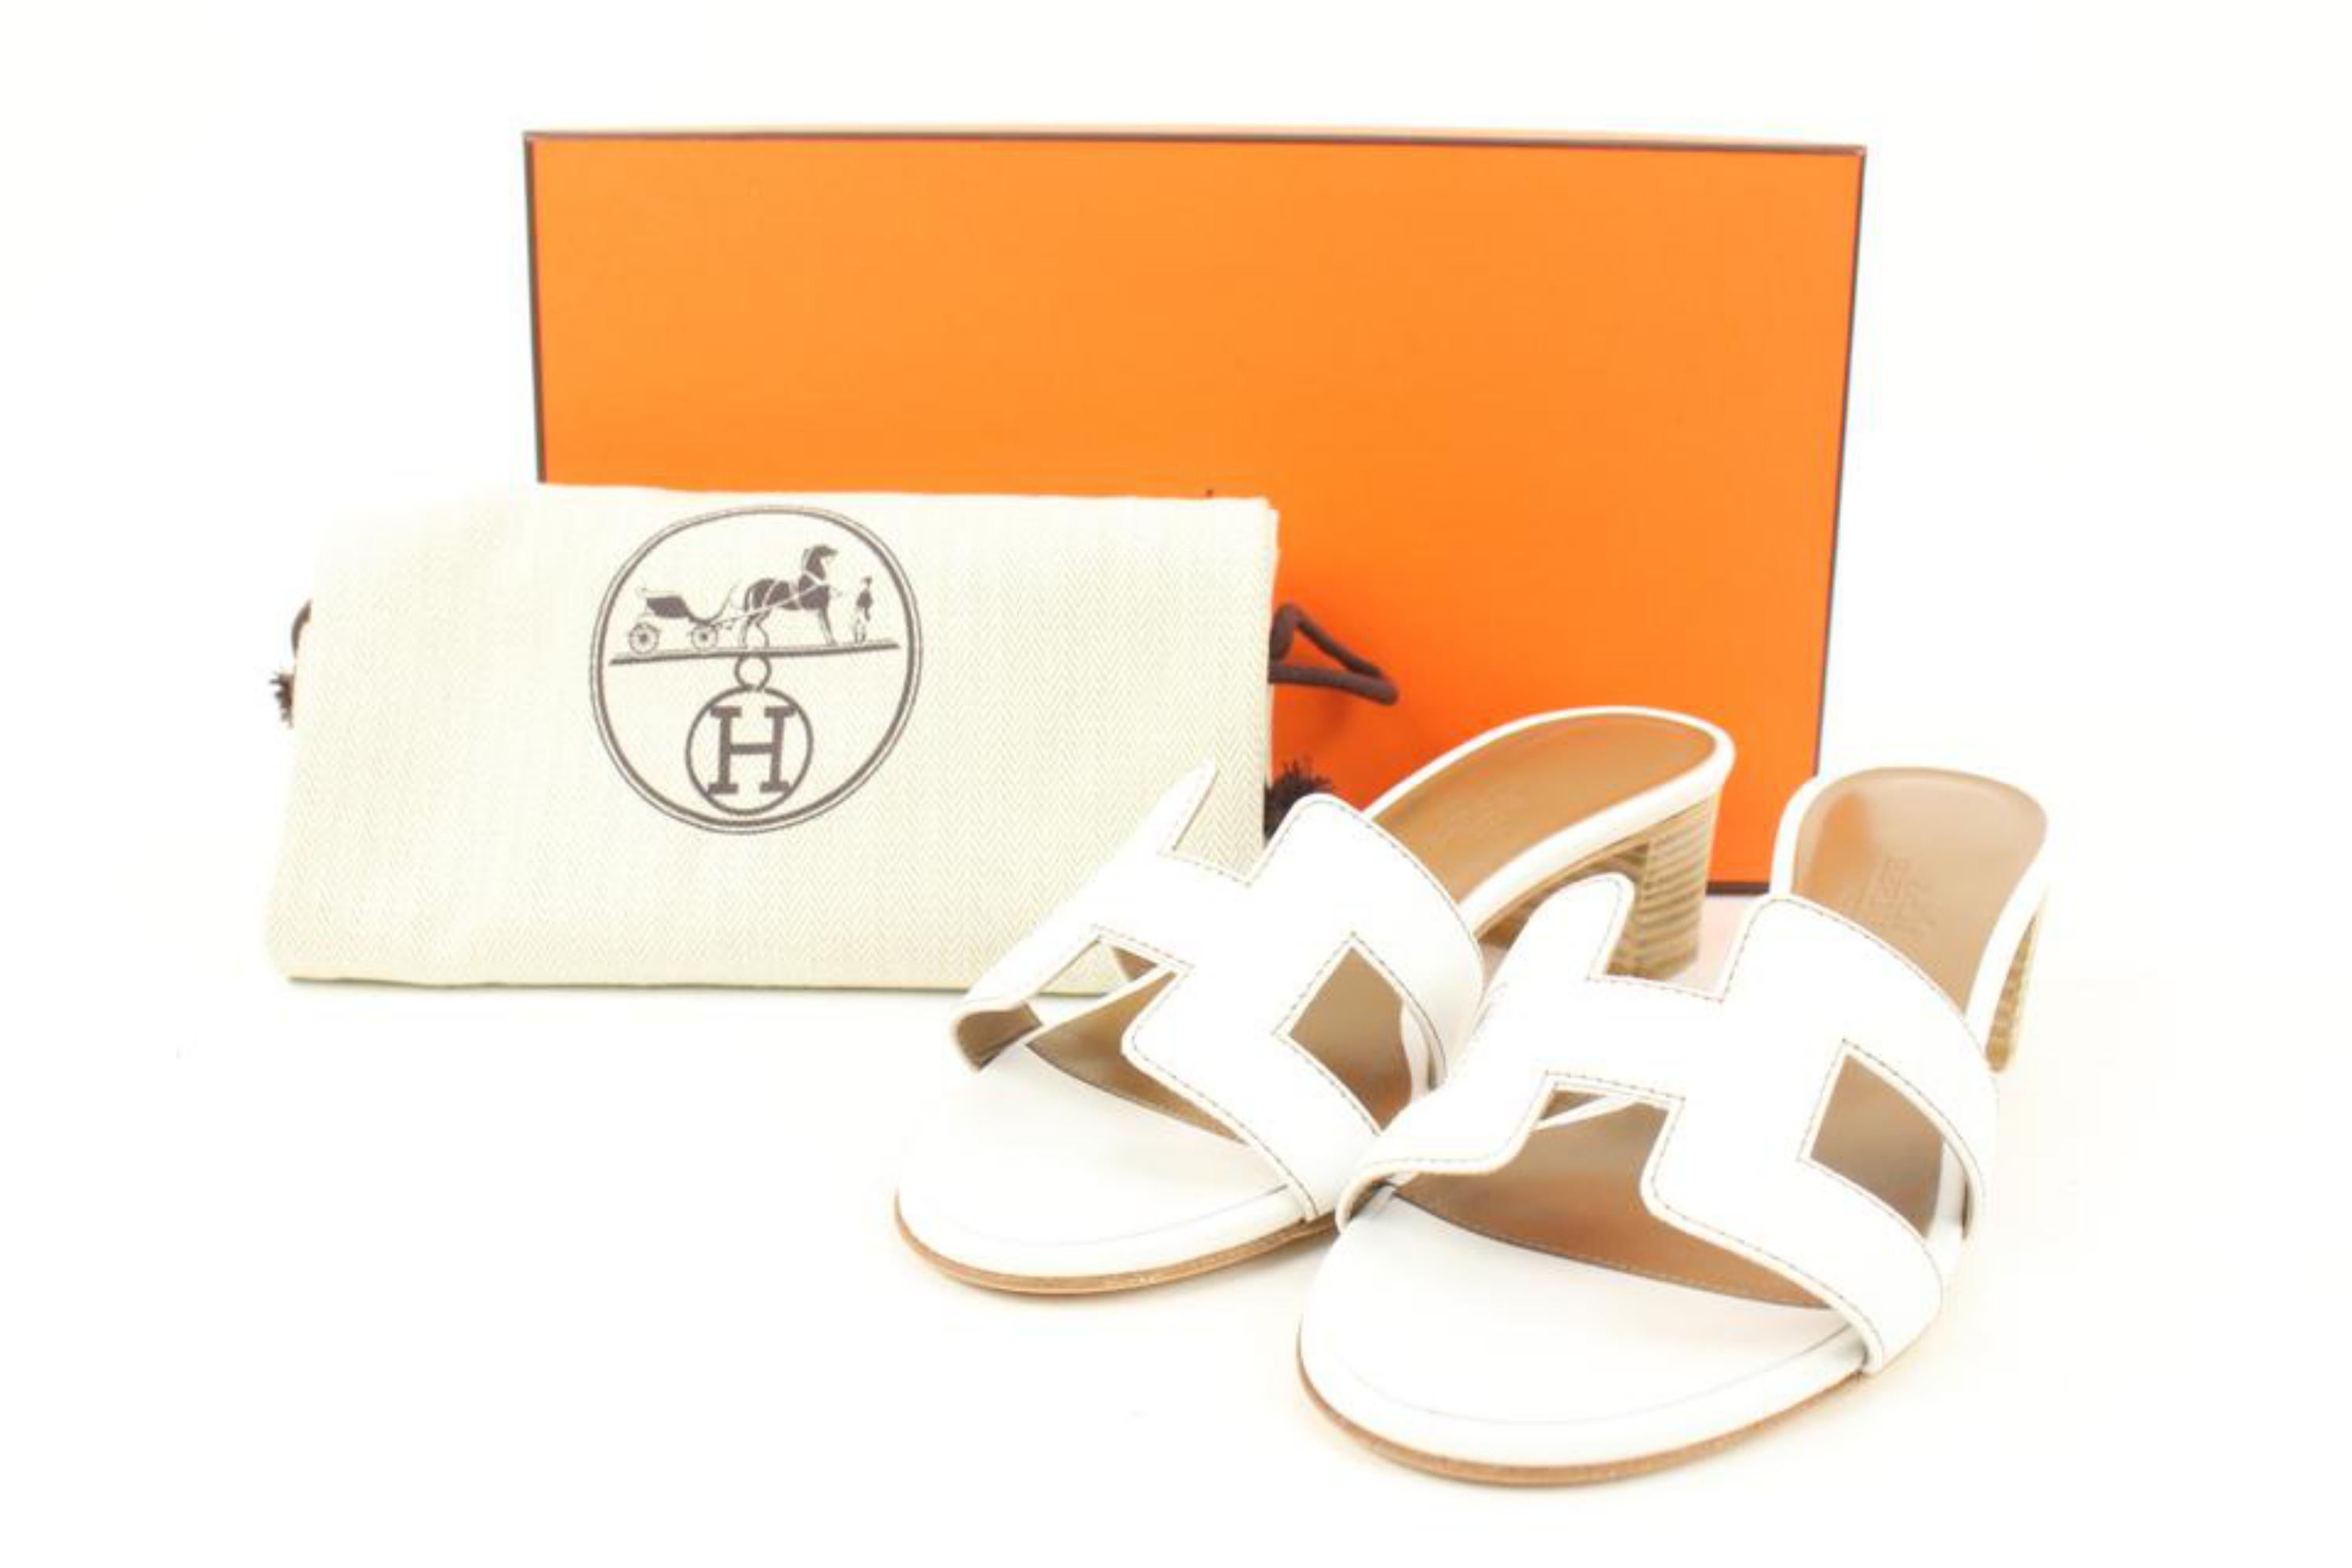 Hermès Women's 35.5 White Calfskin Blanc Oais Mule Sandals Slides S126H55
Date Code/Serial Number: BL071002Z2011
Made In: Italy
Measurements: Length:  9